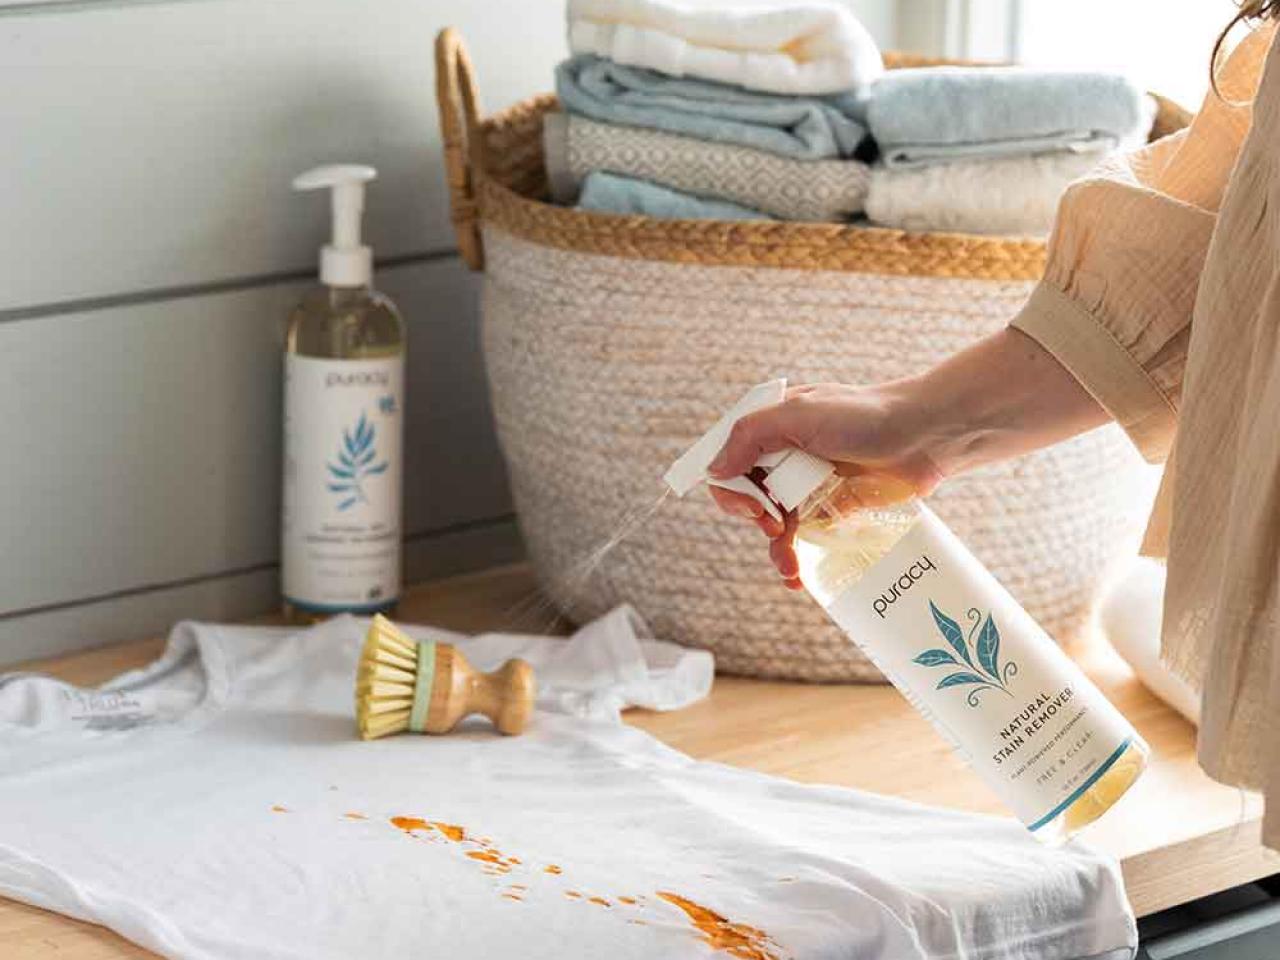 9 Best Natural Cleaning Products For A Nontoxic Home - The Good Trade